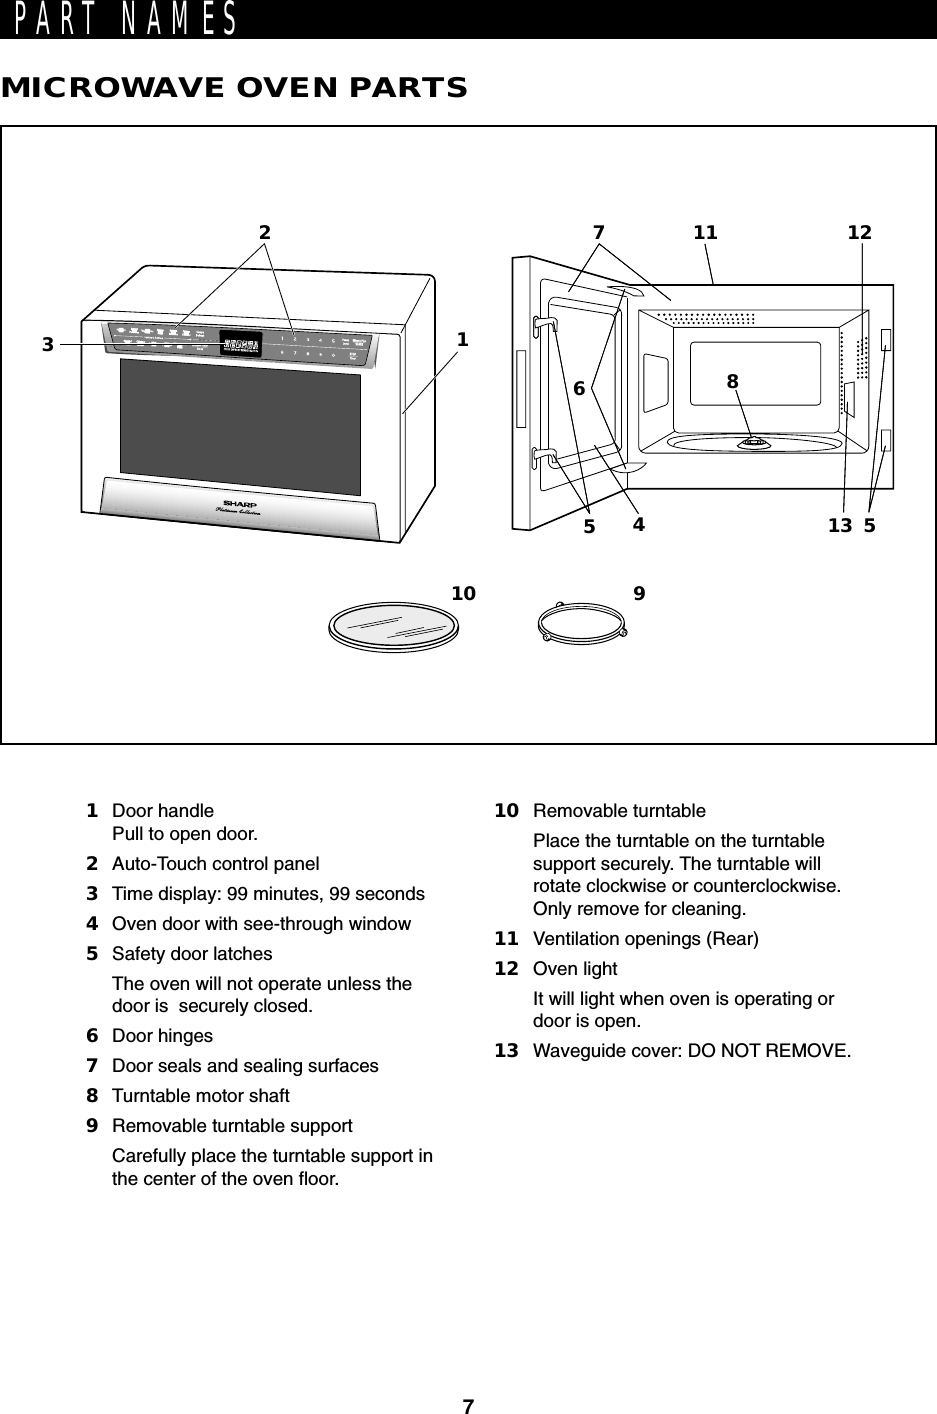 71025413 57911 121638PART NAMESMICROWAVE OVEN PARTS1Door handlePull to open door.2Auto-Touch control panel3Time display: 99 minutes, 99 seconds4Oven door with see-through window5Safety door latchesThe oven will not operate unless thedoor is  securely closed.6Door hinges7Door seals and sealing surfaces8Turntable motor shaft9Removable turntable supportCarefully place the turntable support inthe center of the oven floor.10 Removable turntablePlace the turntable on the turntablesupport securely. The turntable willrotate clockwise or counterclockwise.Only remove for cleaning.11 Ventilation openings (Rear)12 Oven lightIt will light when oven is operating ordoor is open.13 Waveguide cover: DO NOT REMOVE.